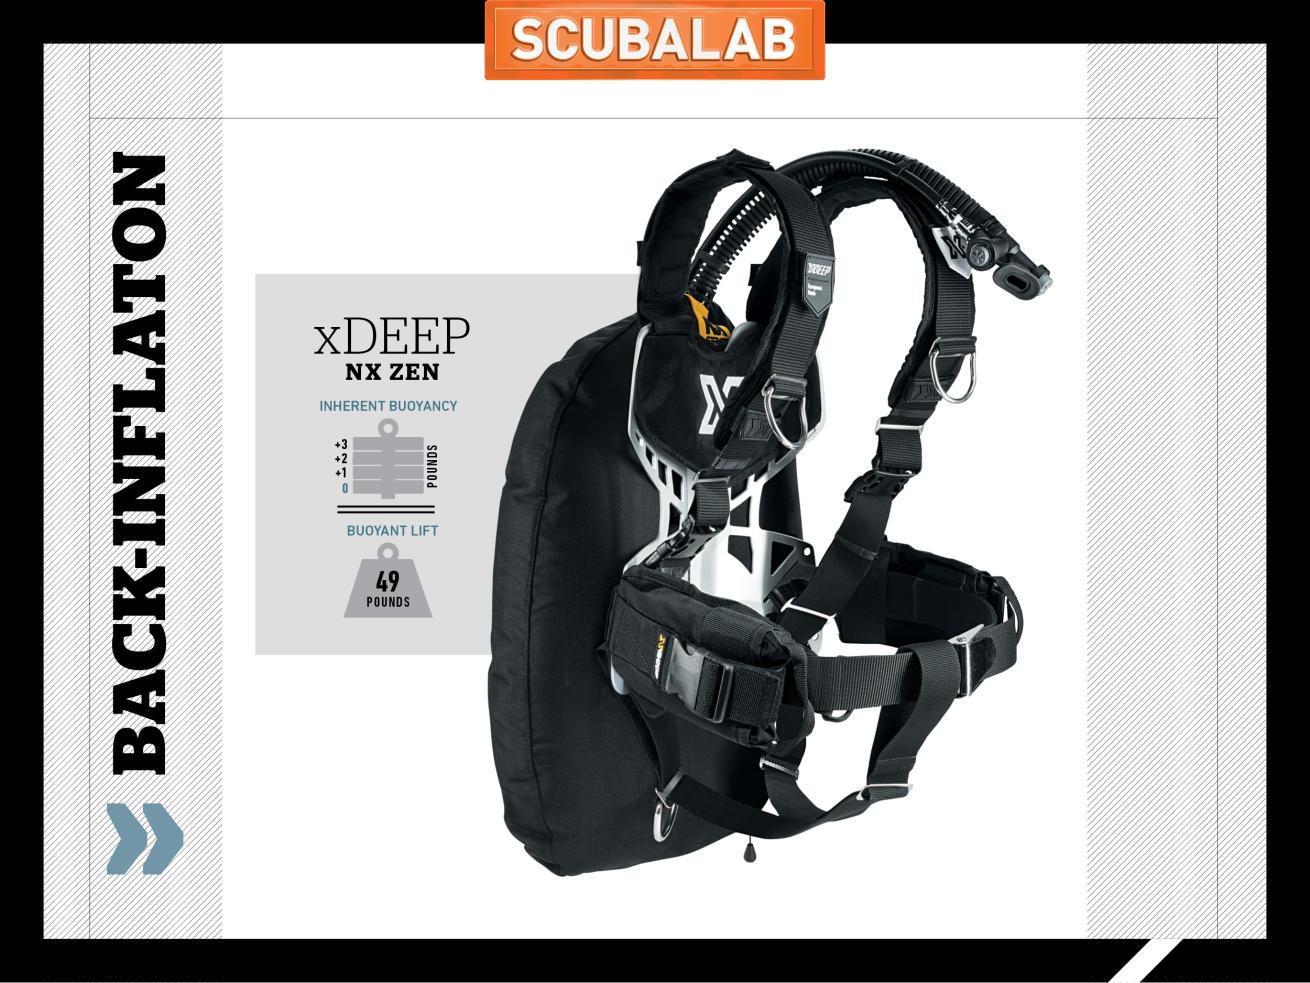 xDeep NY Zen back-inflate BC ScubaLab review